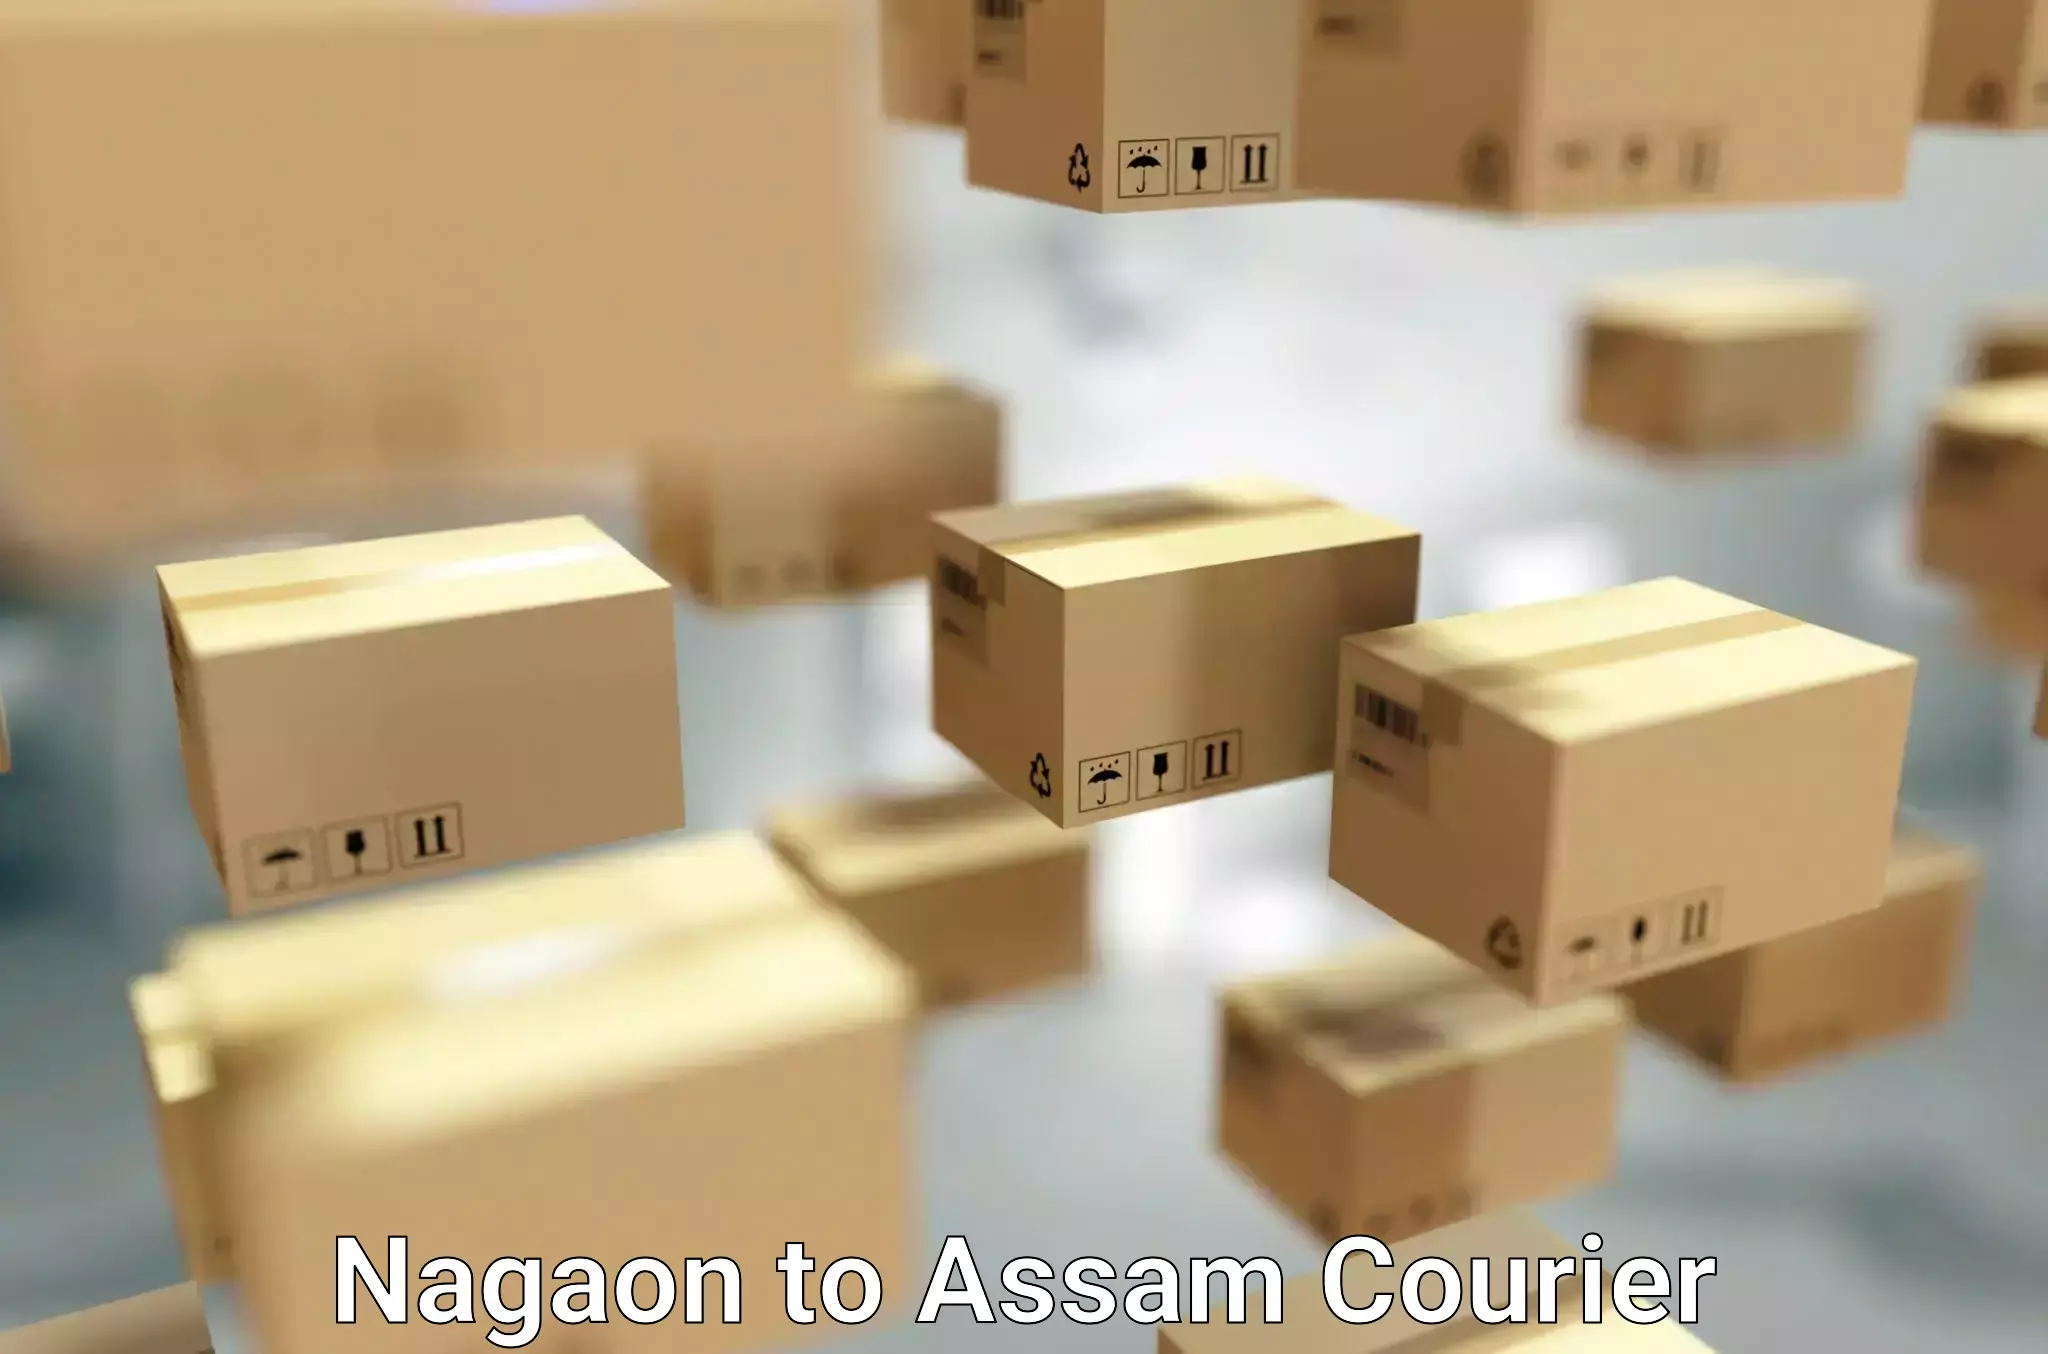 Hassle-free relocation Nagaon to Gohpur